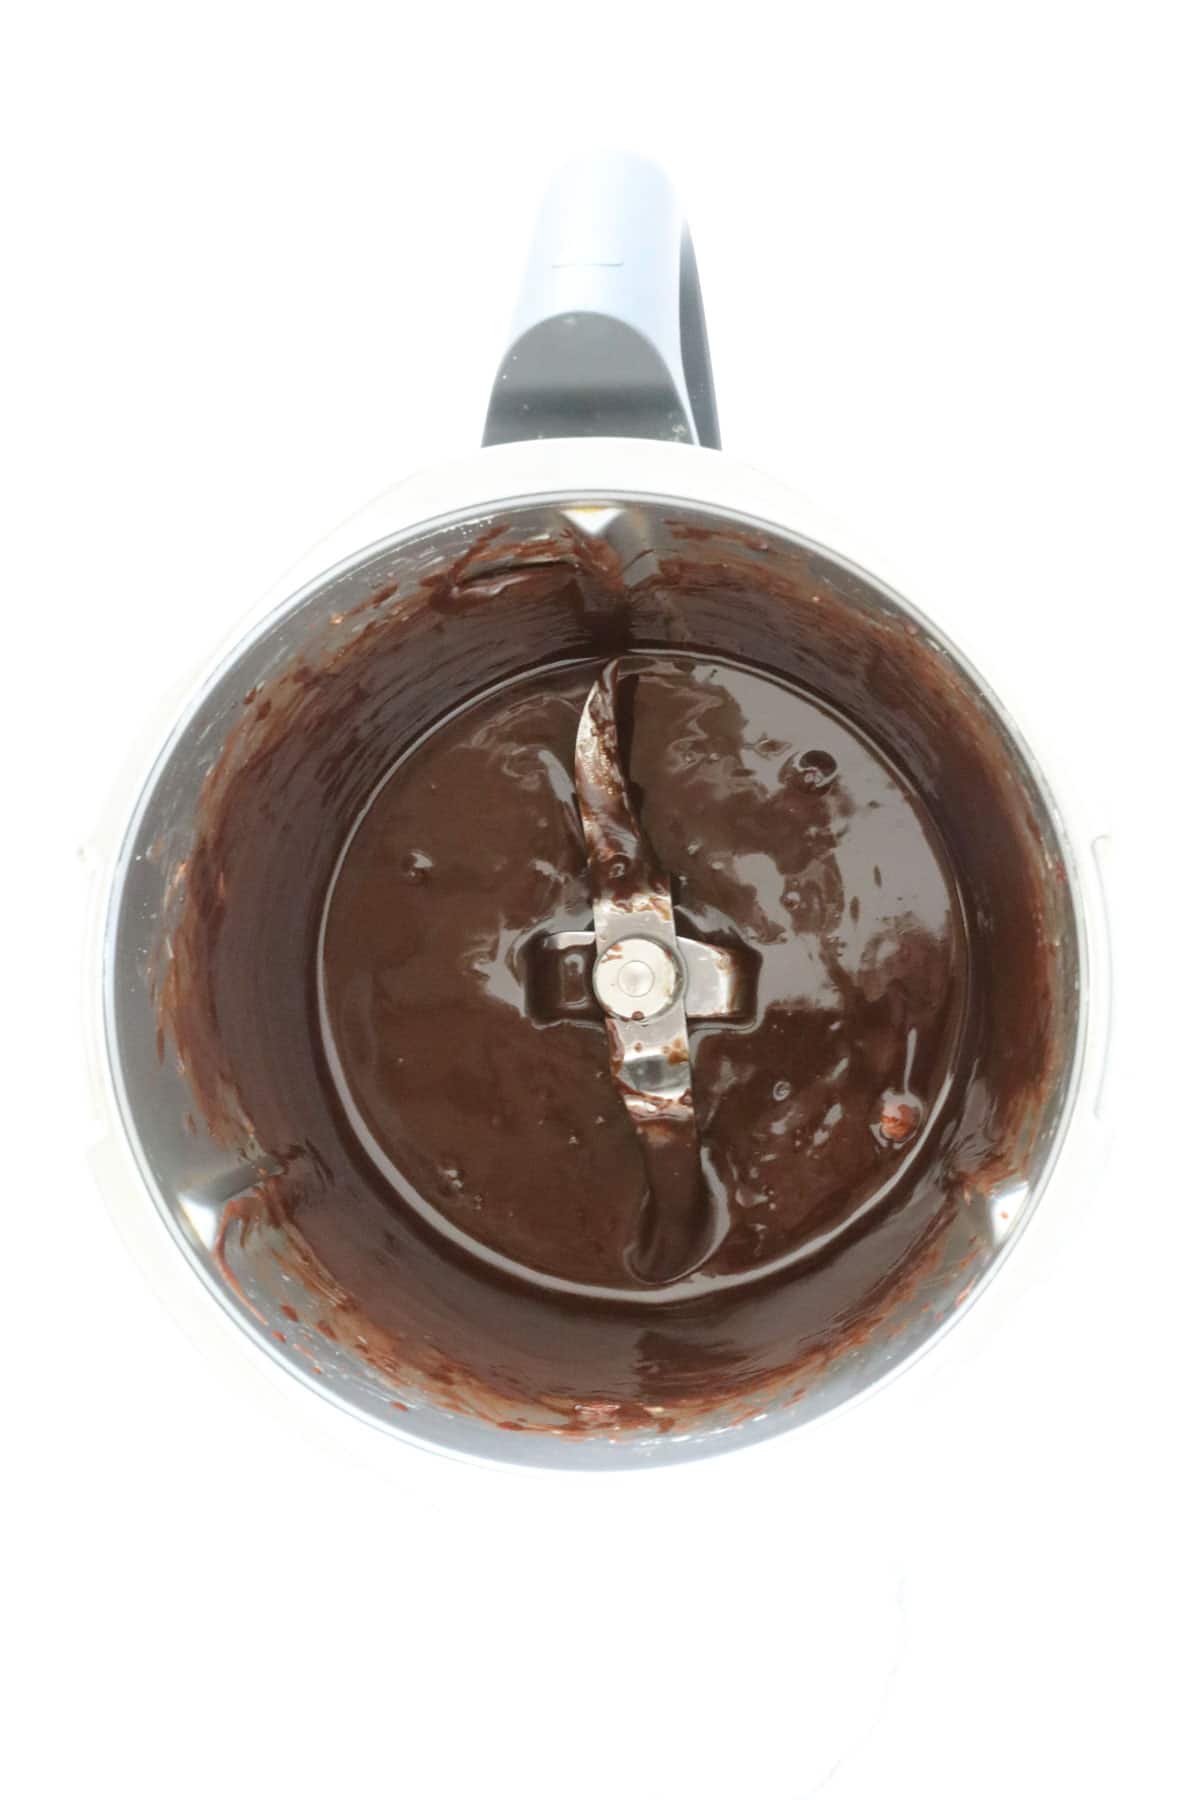 Melted chocolate in a Thermomix bowl.